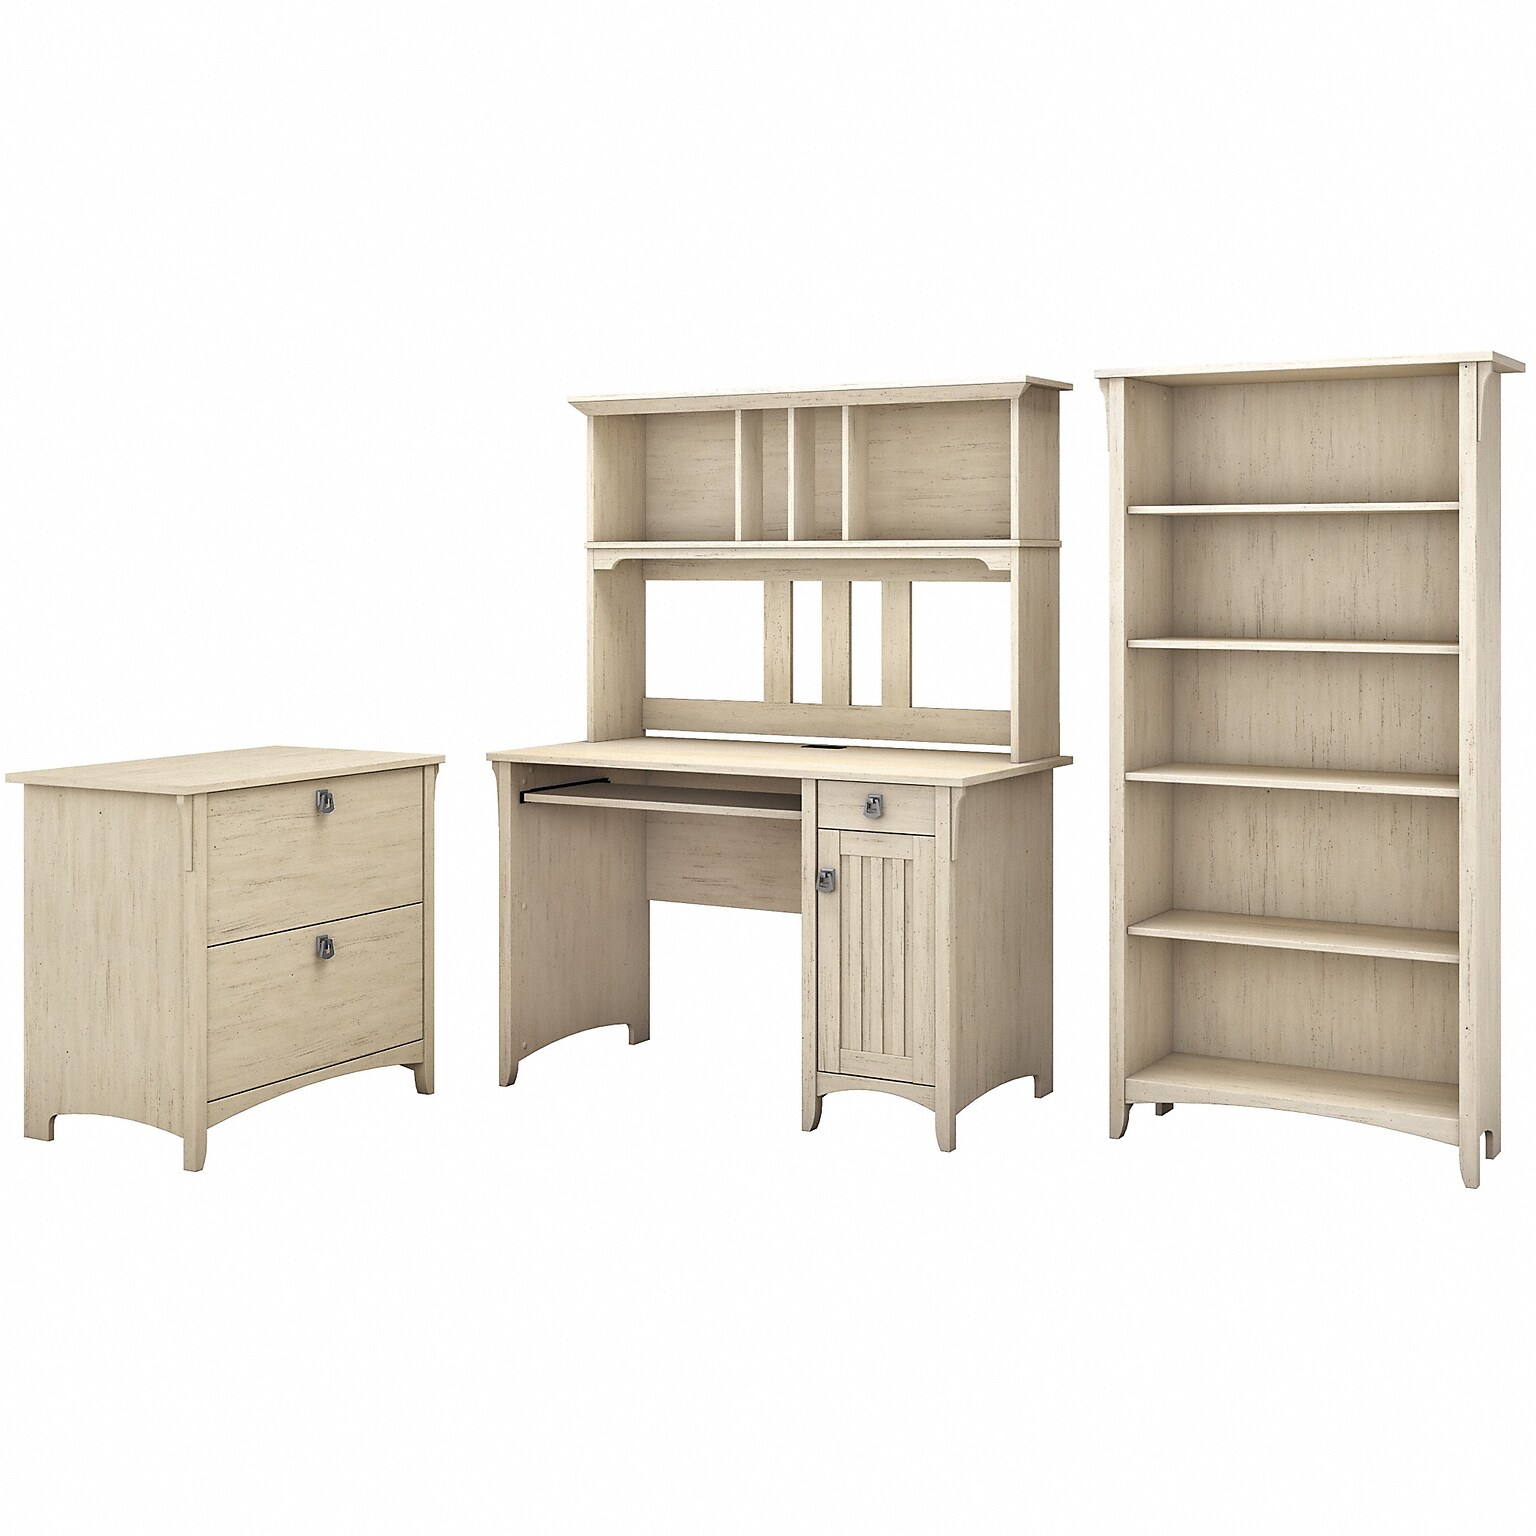 Bush Furniture Salinas 48W Mission Desk with Hutch, Lateral File Cabinet and 5 Shelf Bookcase, Antique White (SAL002AW)